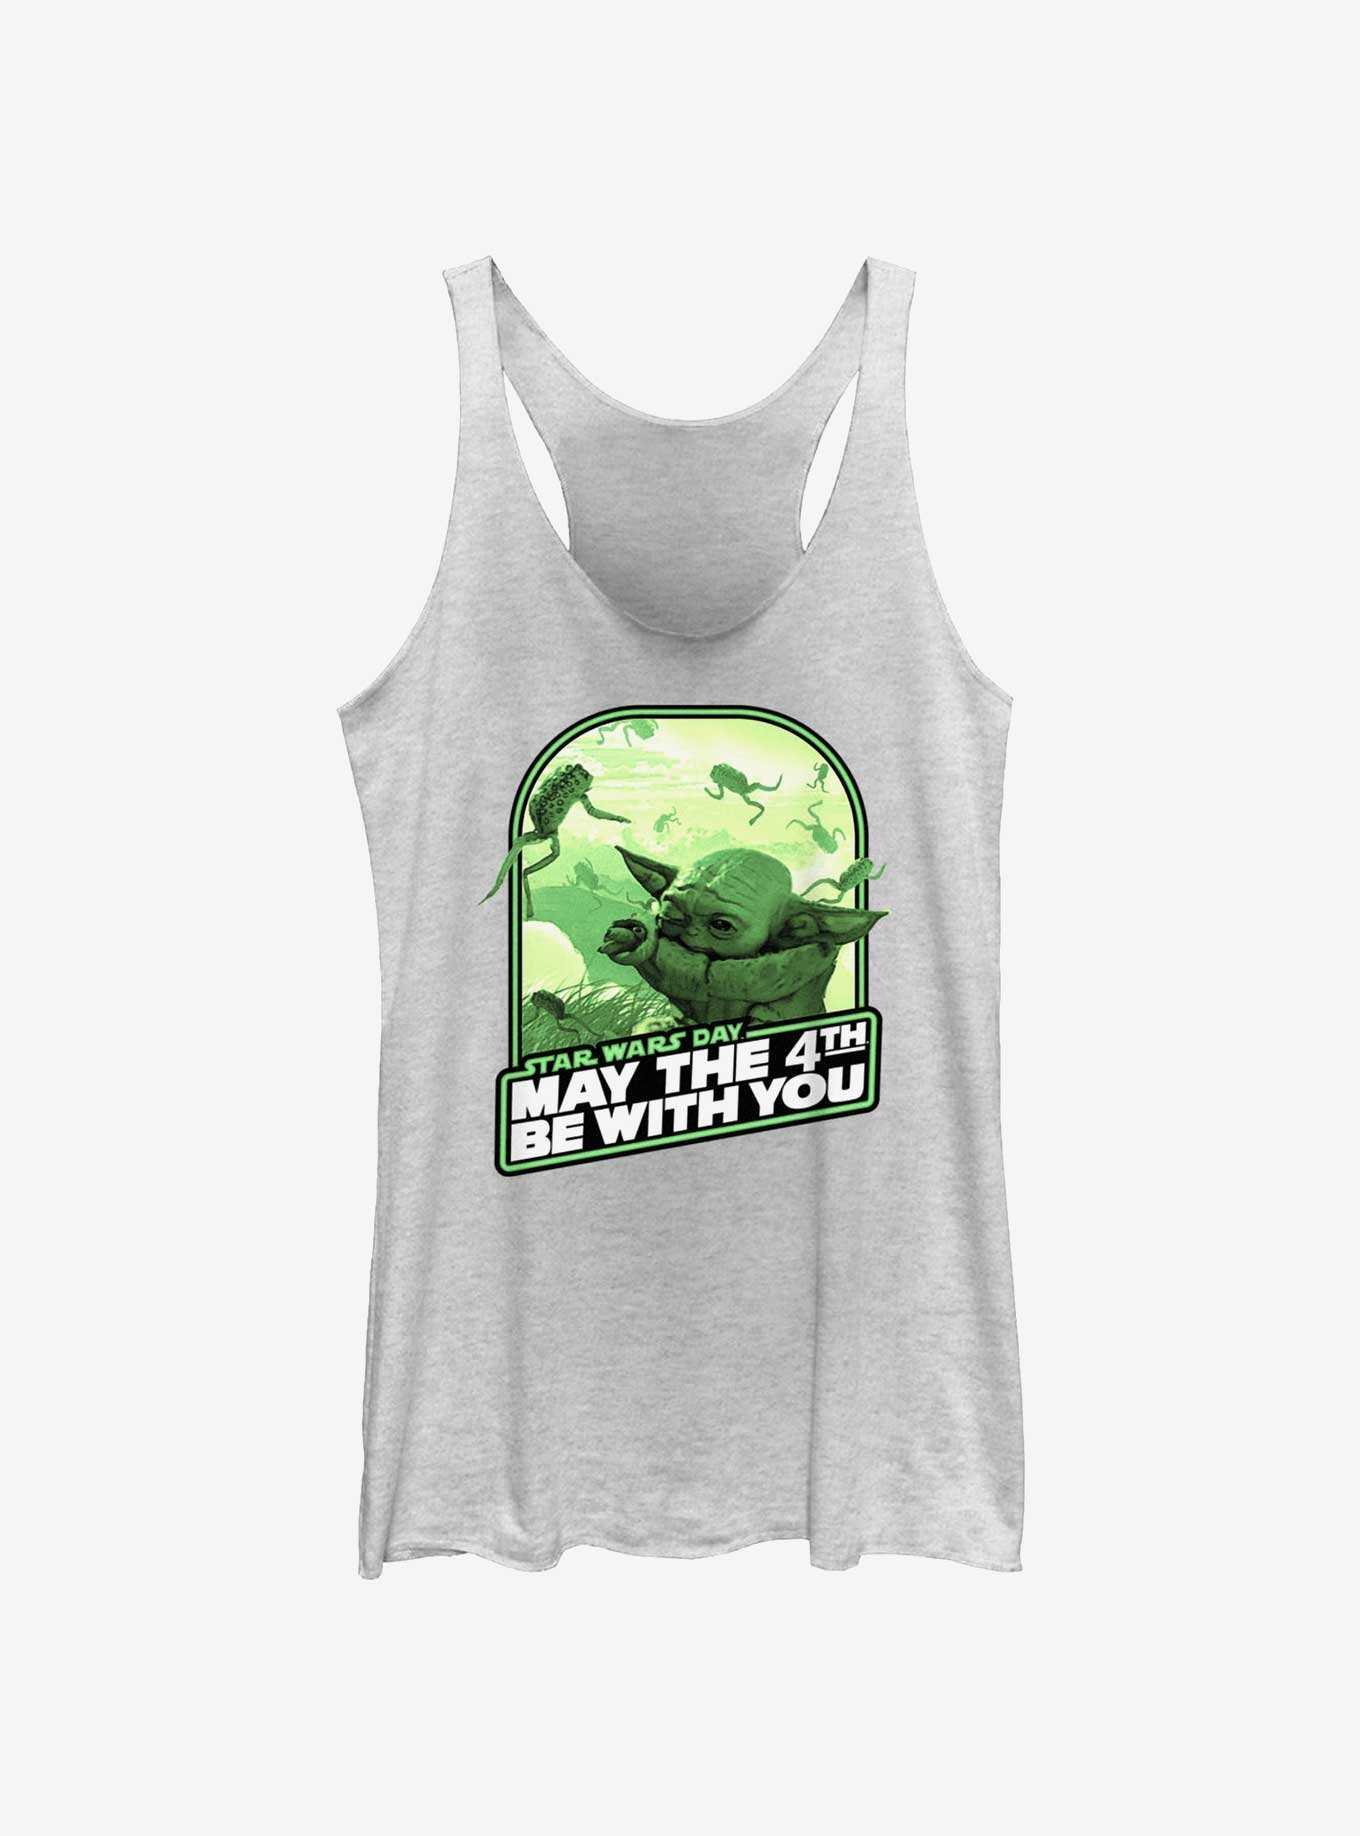 Star Wars Grogu Frog Food May The 4th Be With You Girls Tank, , hi-res